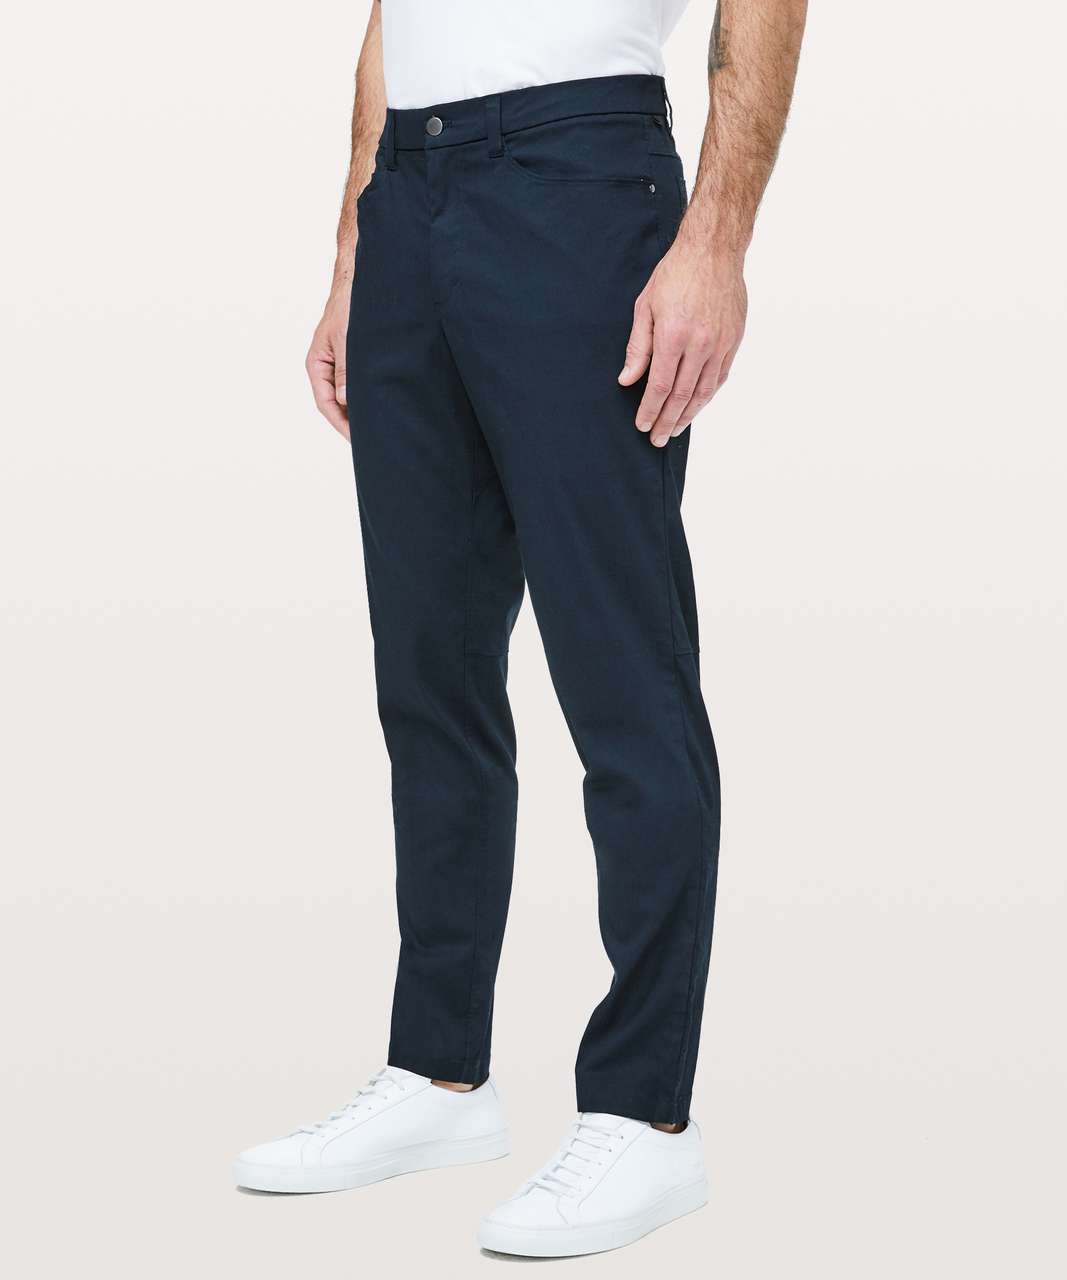 Lululemon Navy PANTS CA 35801 RN 106259 size 6 / small - $30 - From Jessica